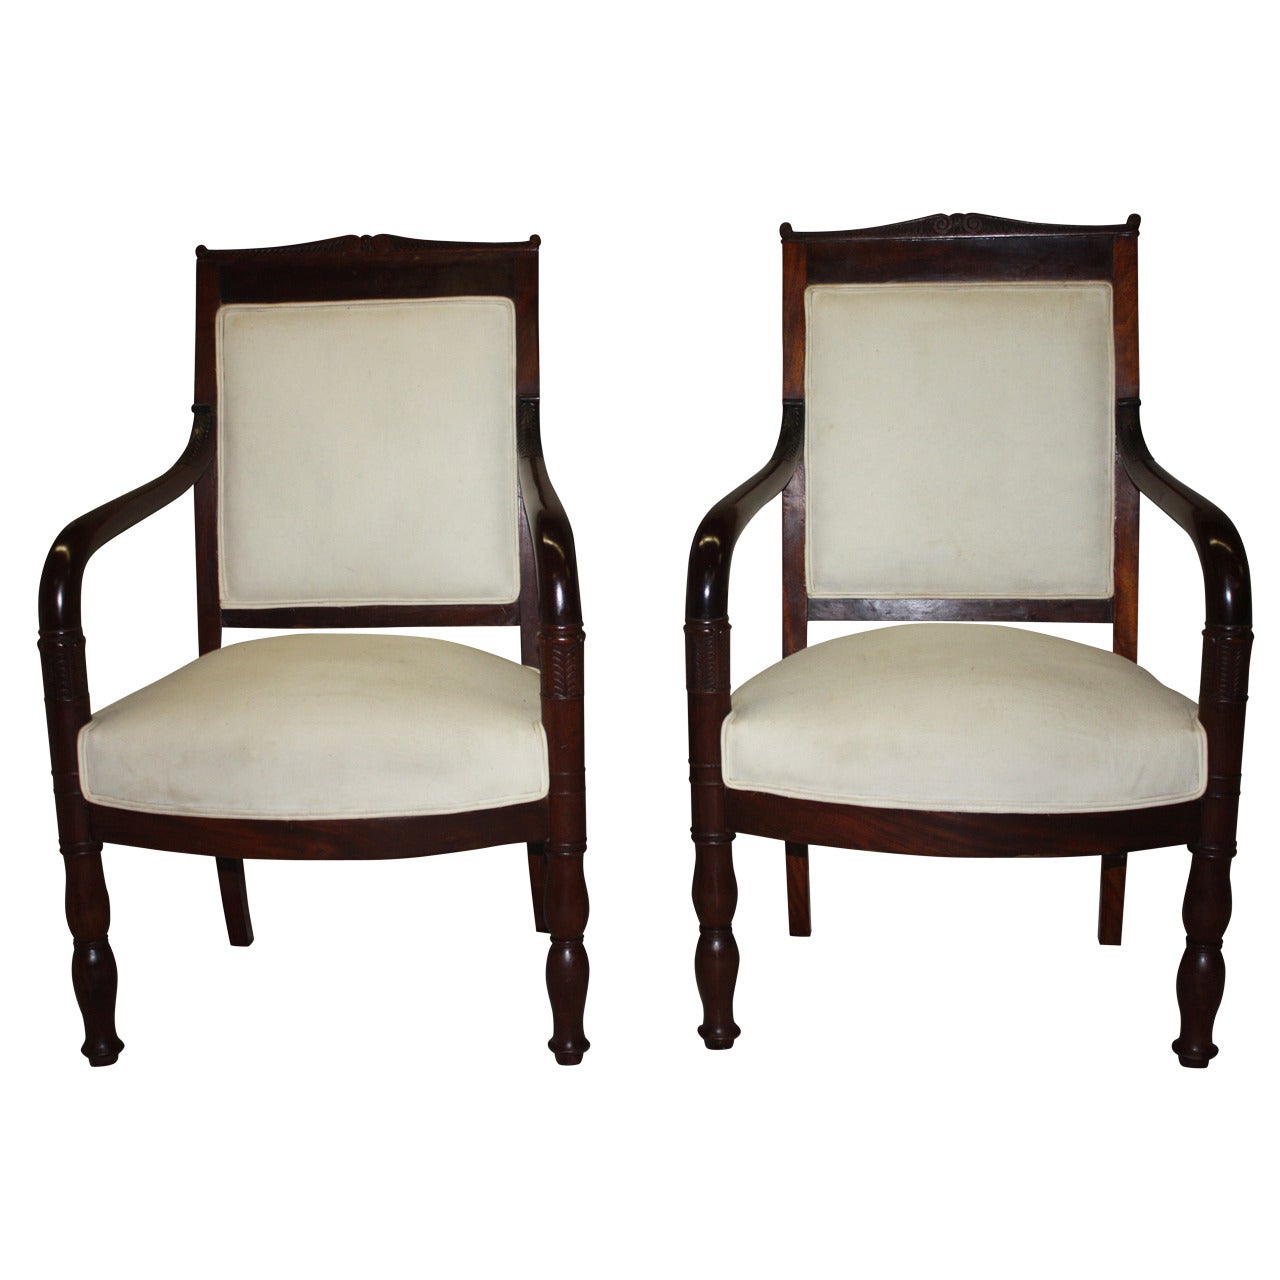 Early 19th Century Pair of Chairs